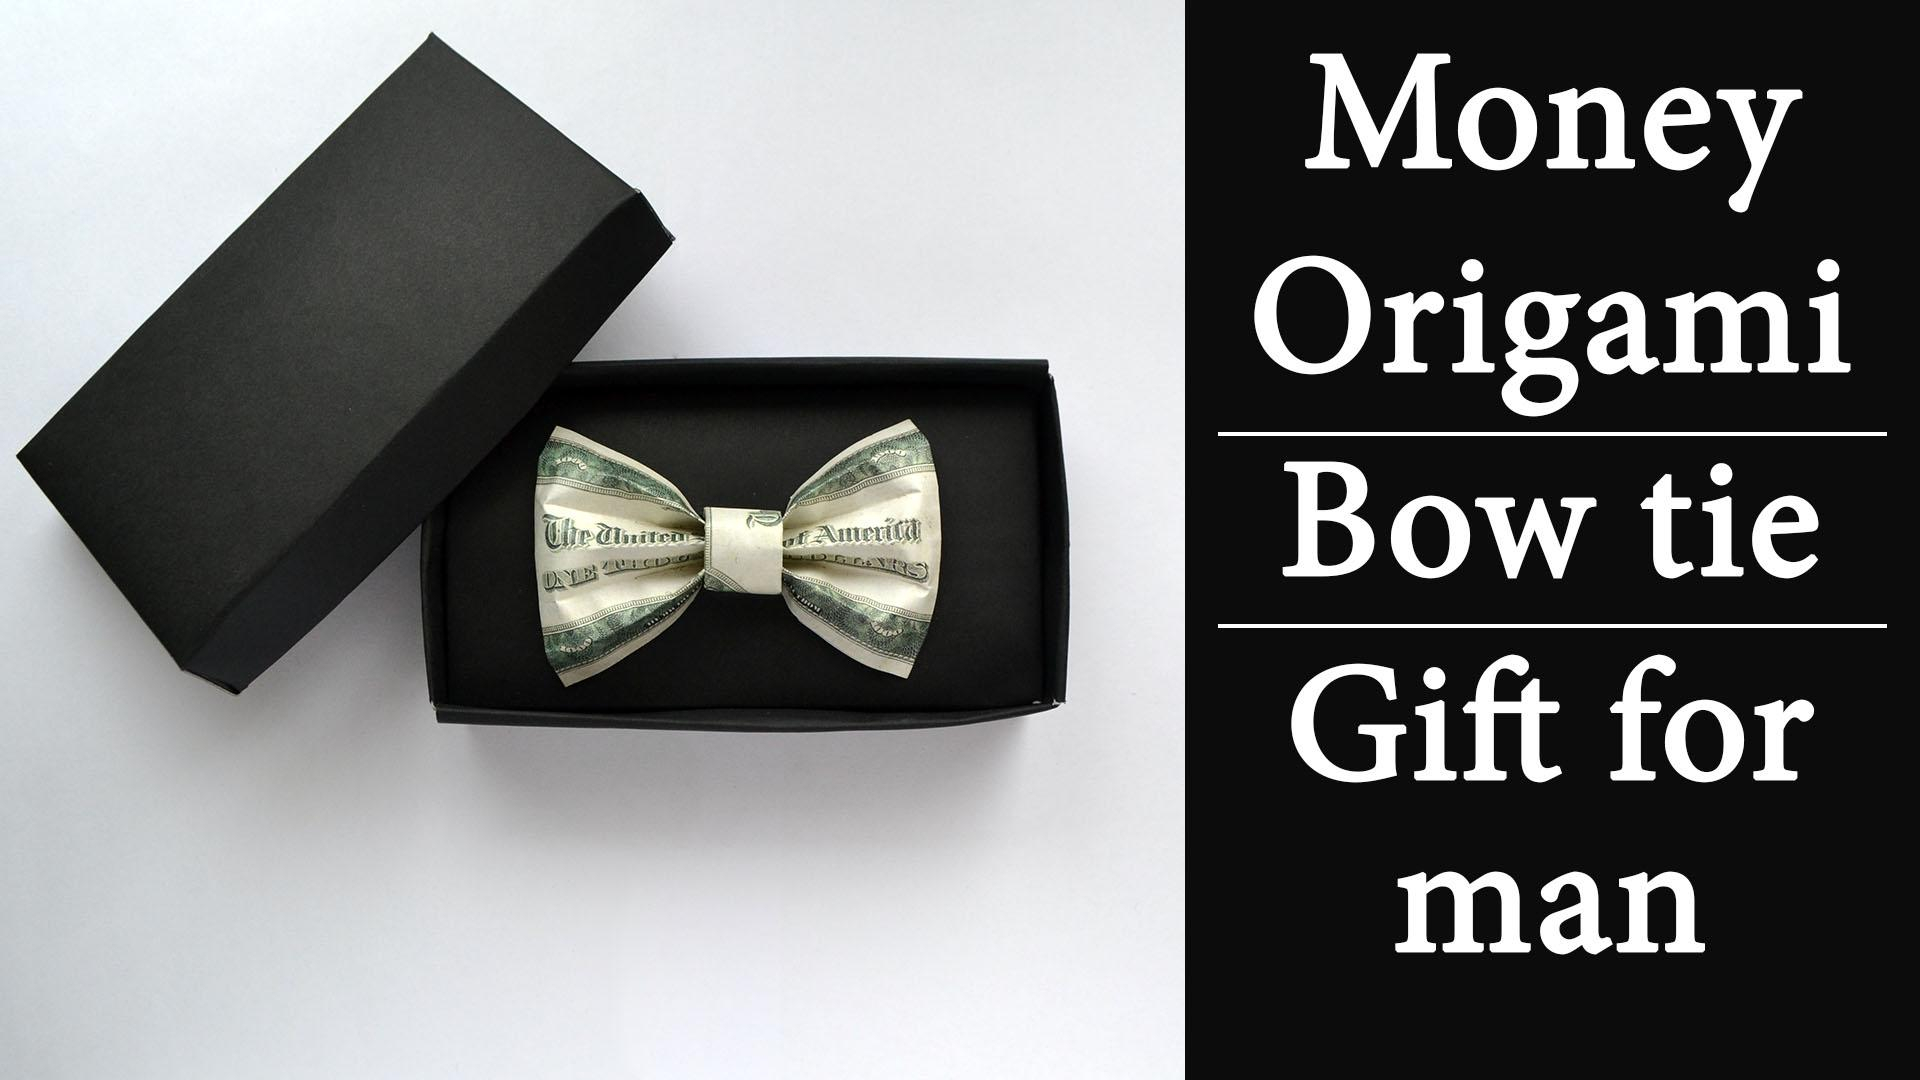 Dollar Origami Bow Tie Money Bow Tie In Gift Box Excellent Gift For Man Origami Dollar